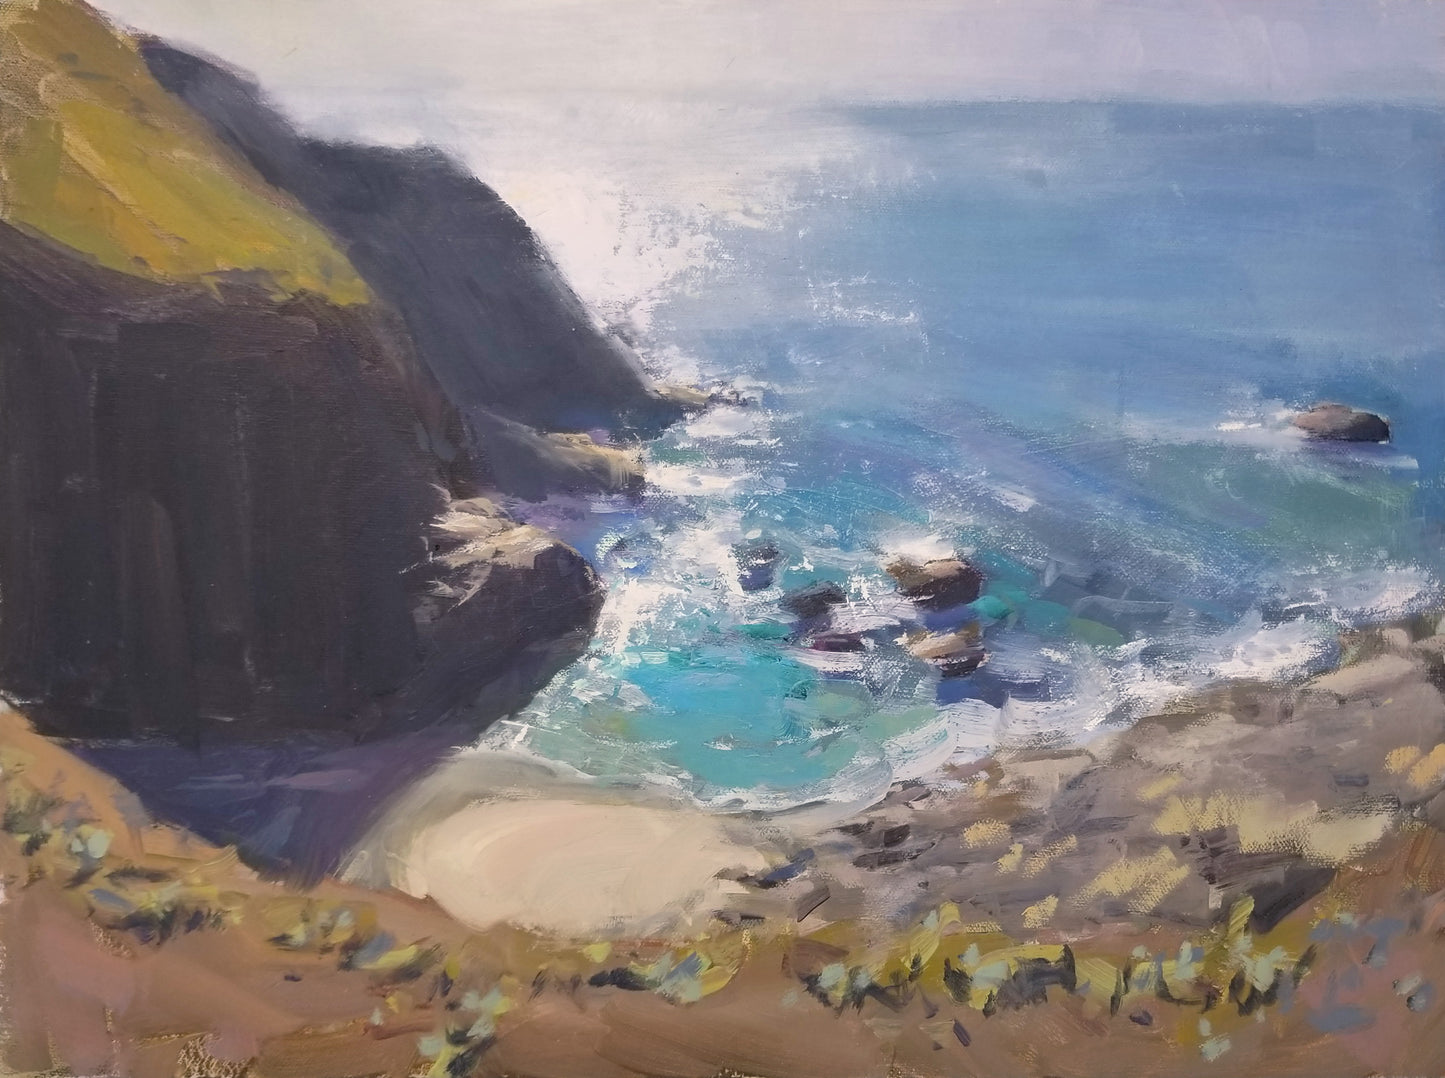 "Along the Coastal Path" 12x16 original oil painting by Artist Kristina Sellers